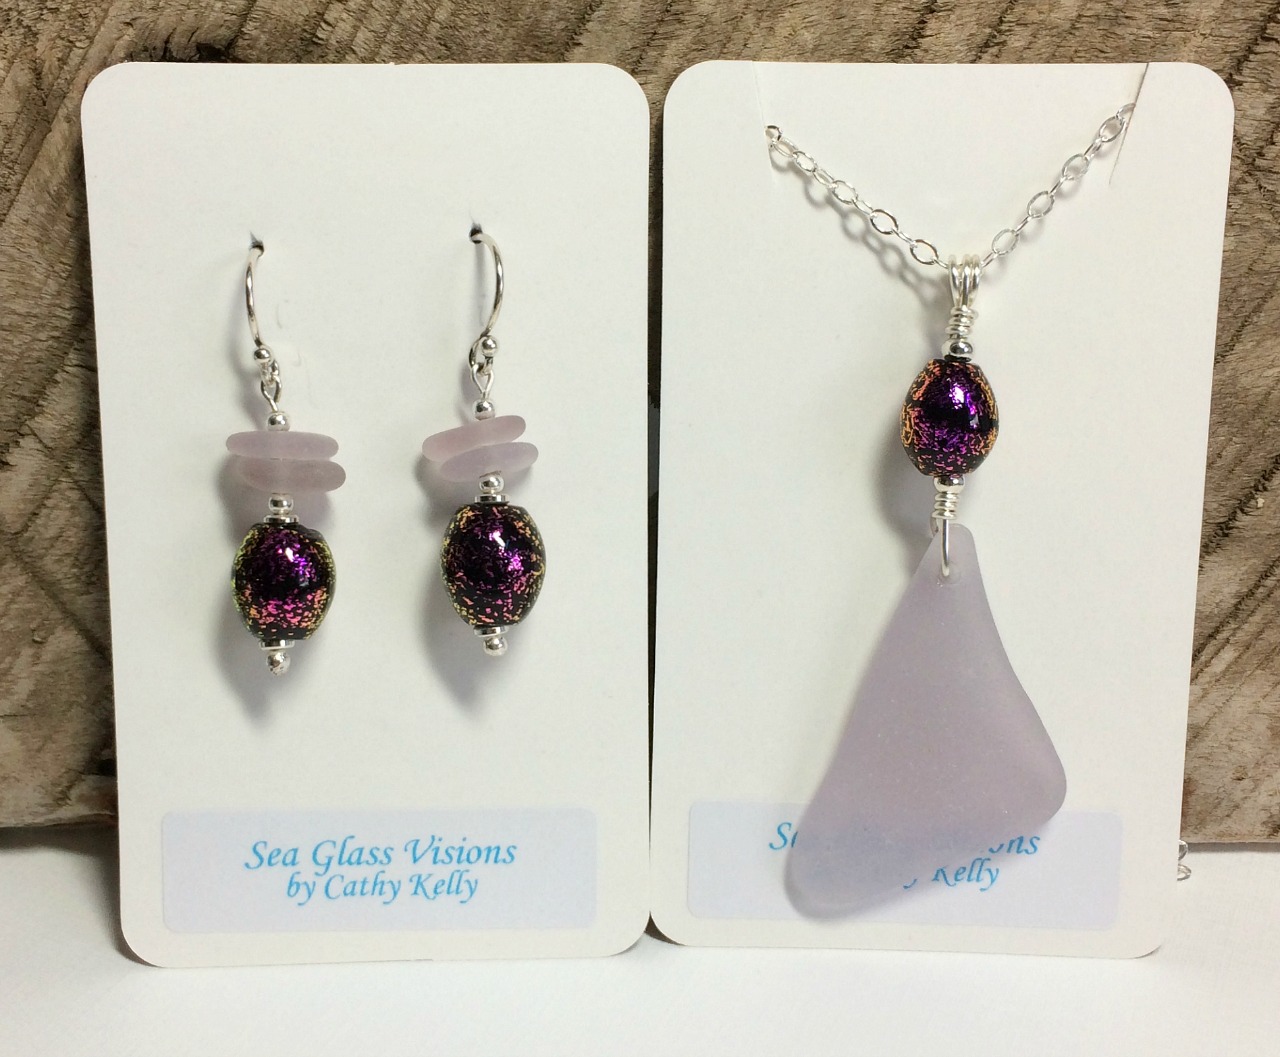 Lavender Sea Glass Pendant & Earring Set Created by SeaGlassVisions